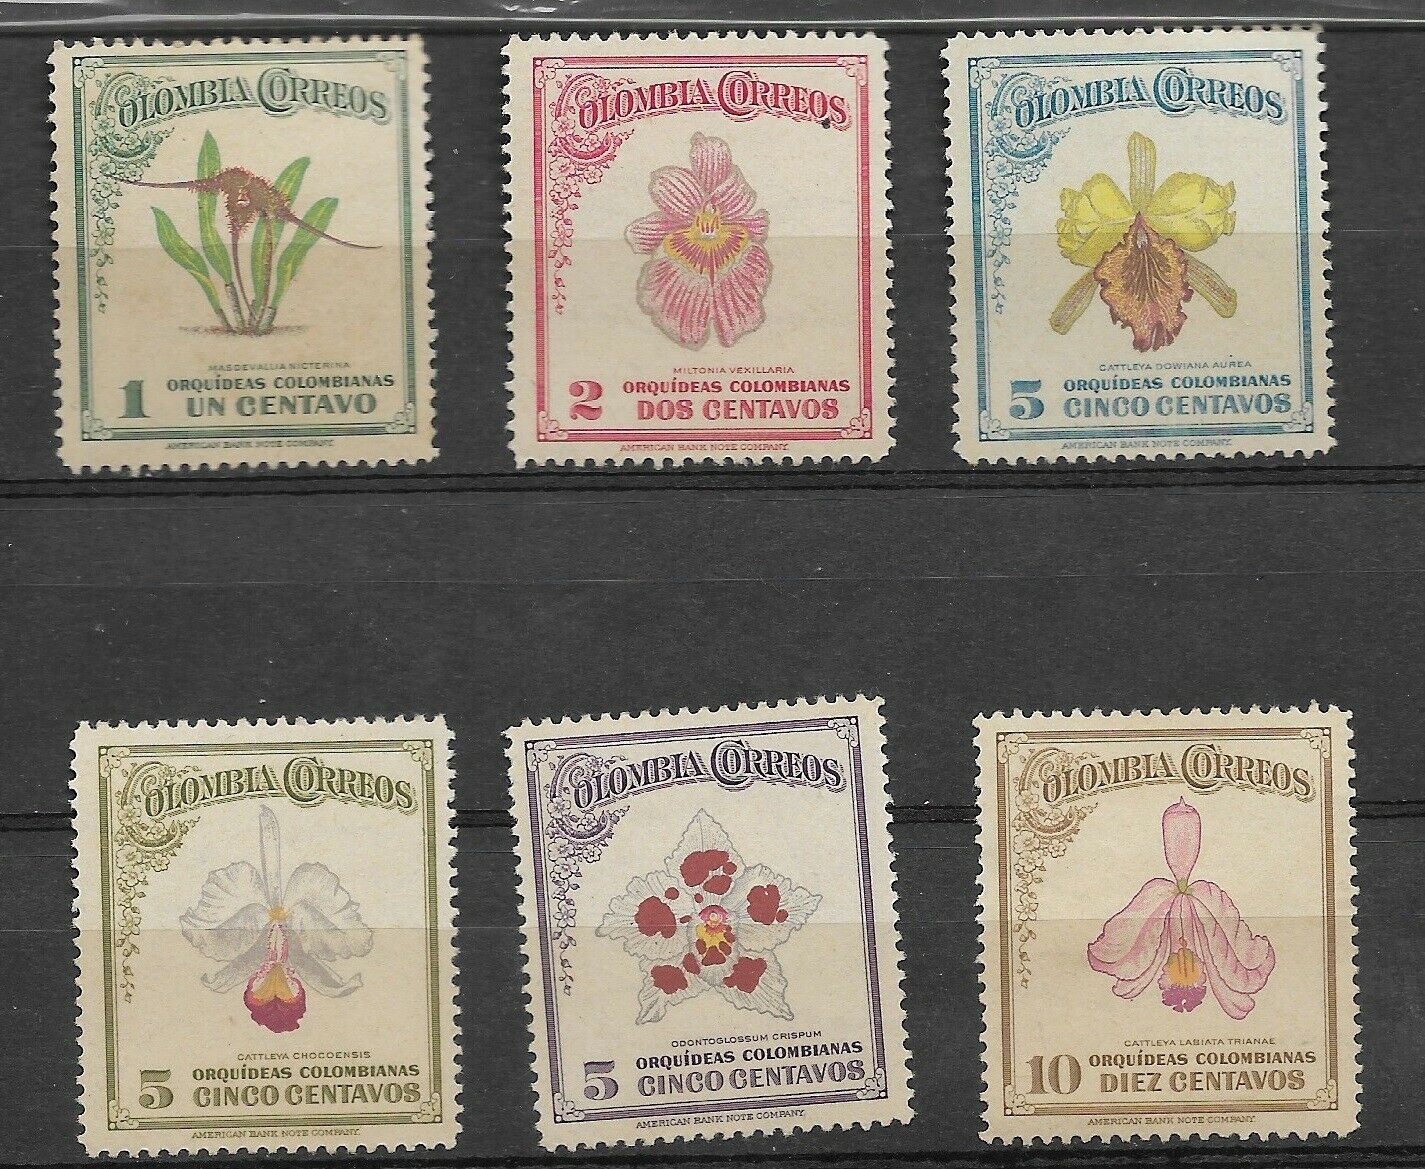 Colombia Year 1947 Orchids Flowers Set Mh Scott 546/51 Michel 500/505 Vf